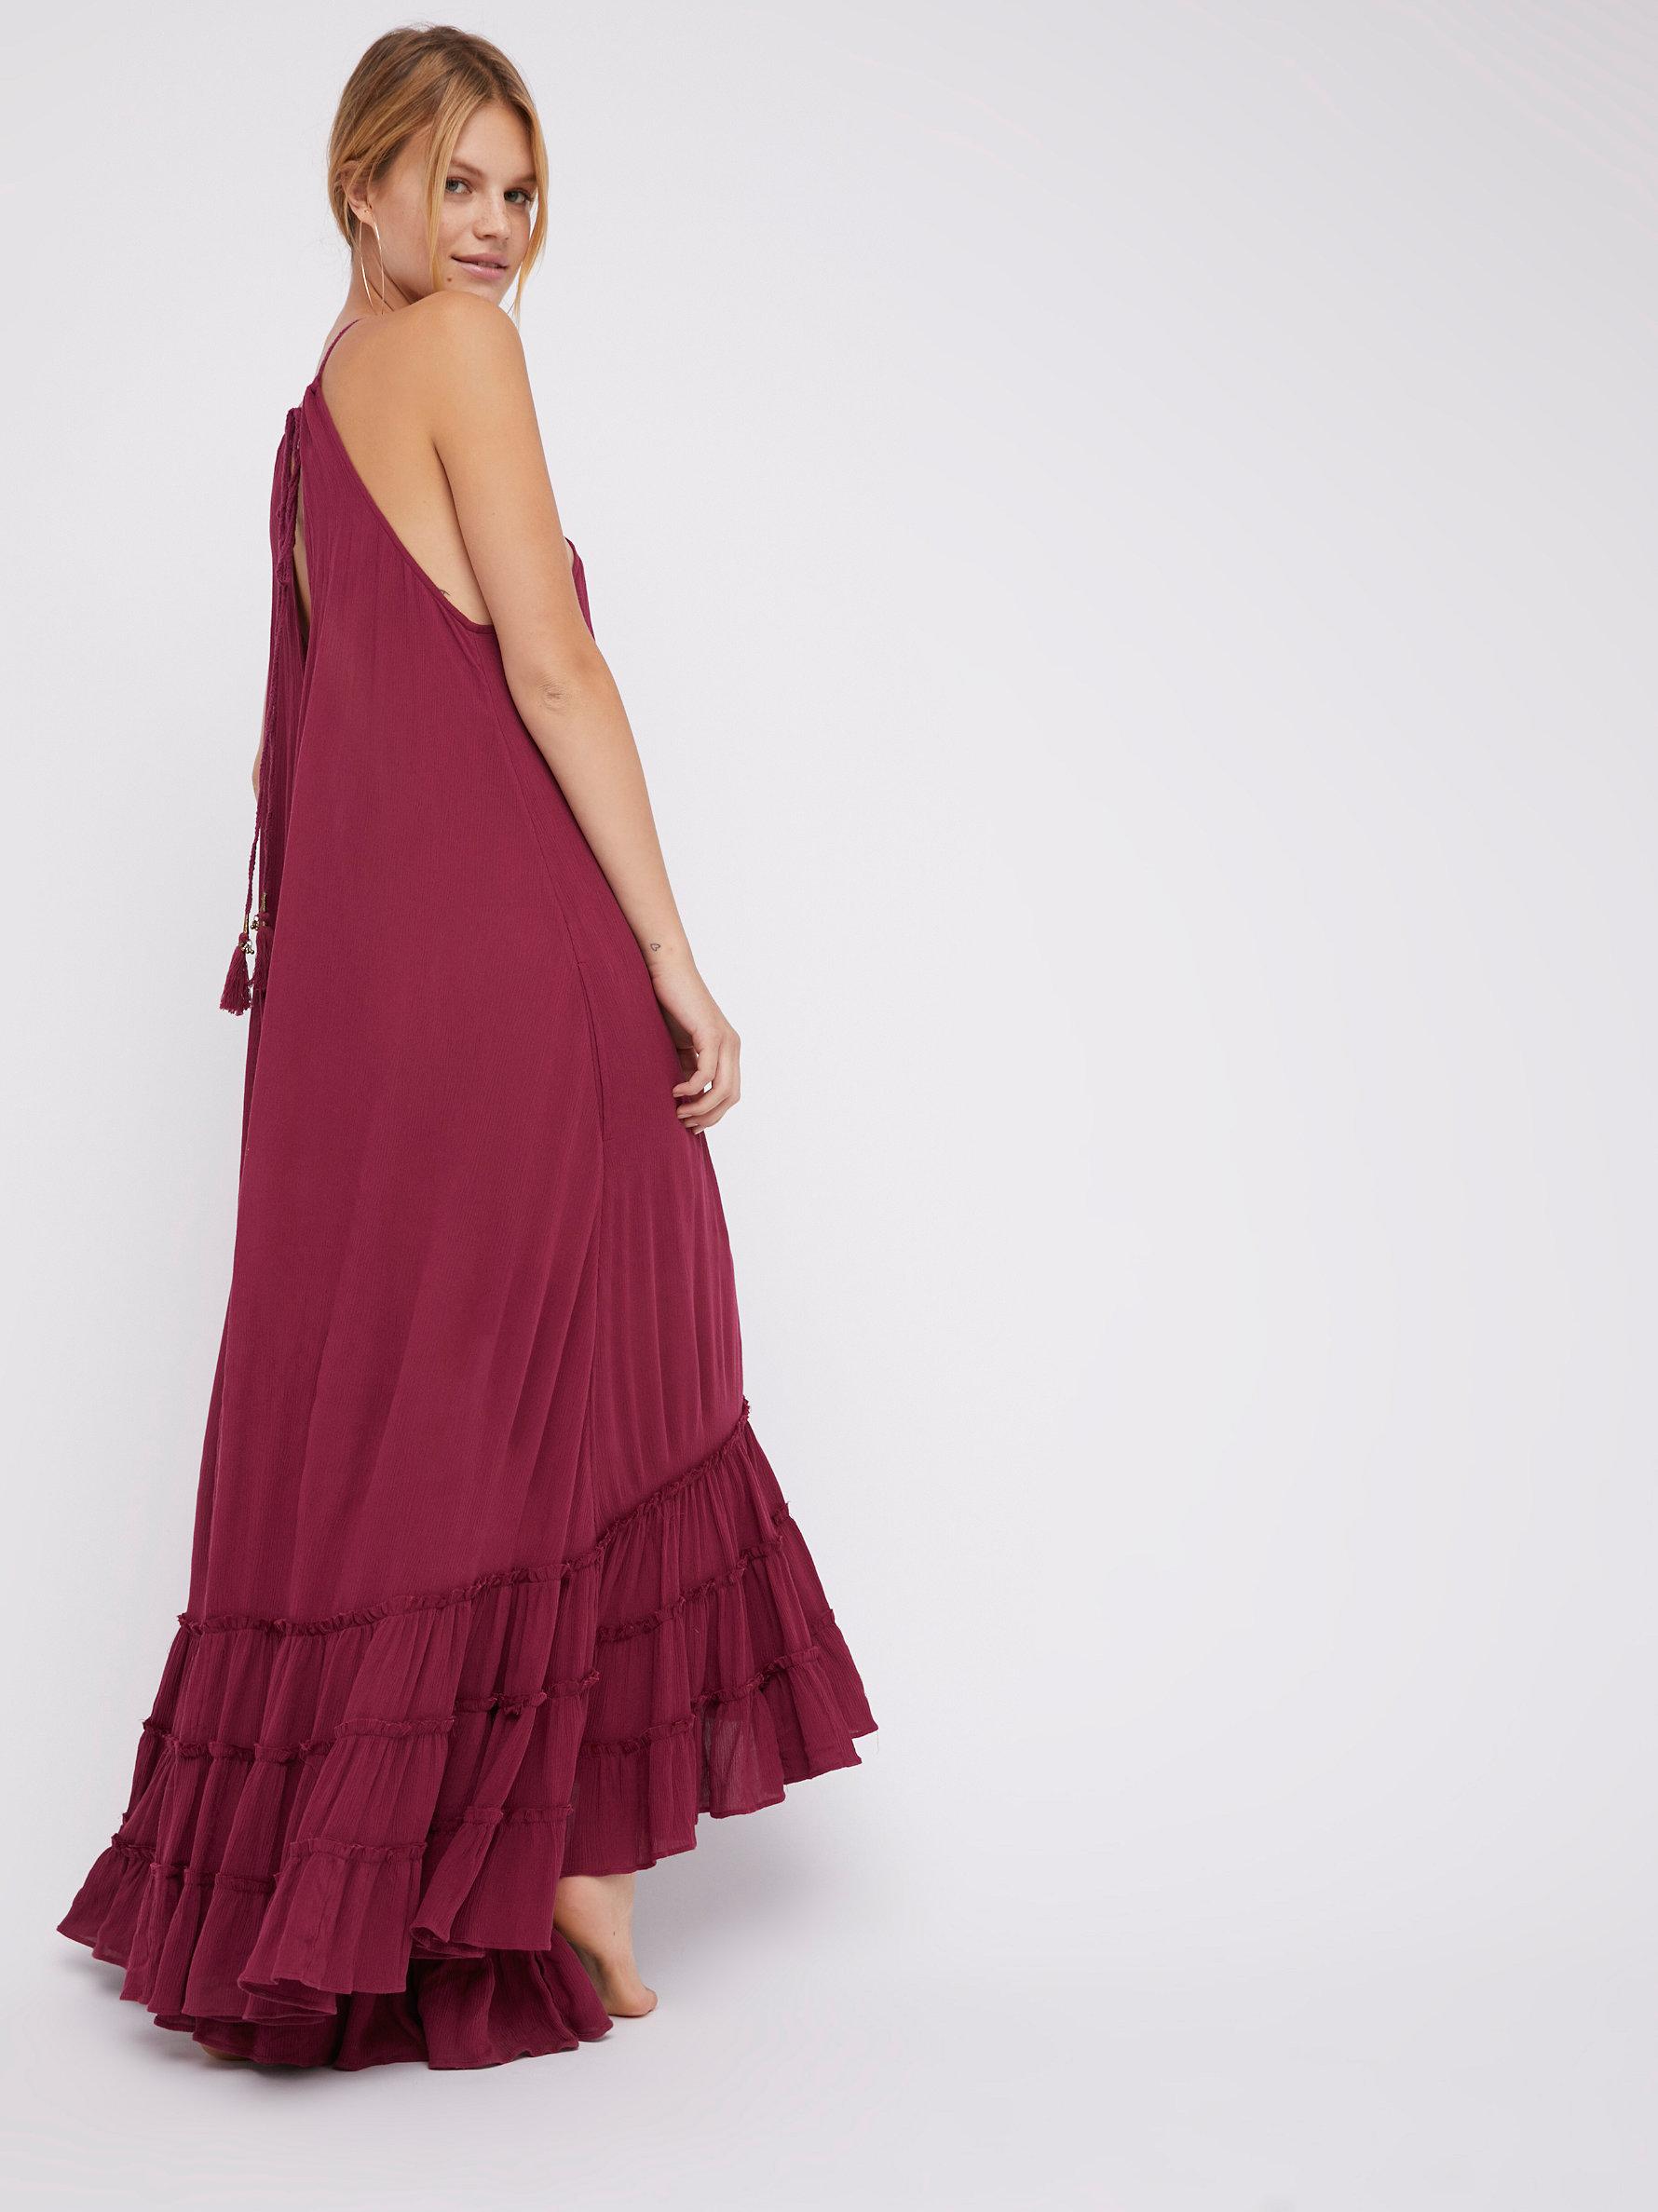 Free People Wrap Around Maxi Dress in Red - Lyst